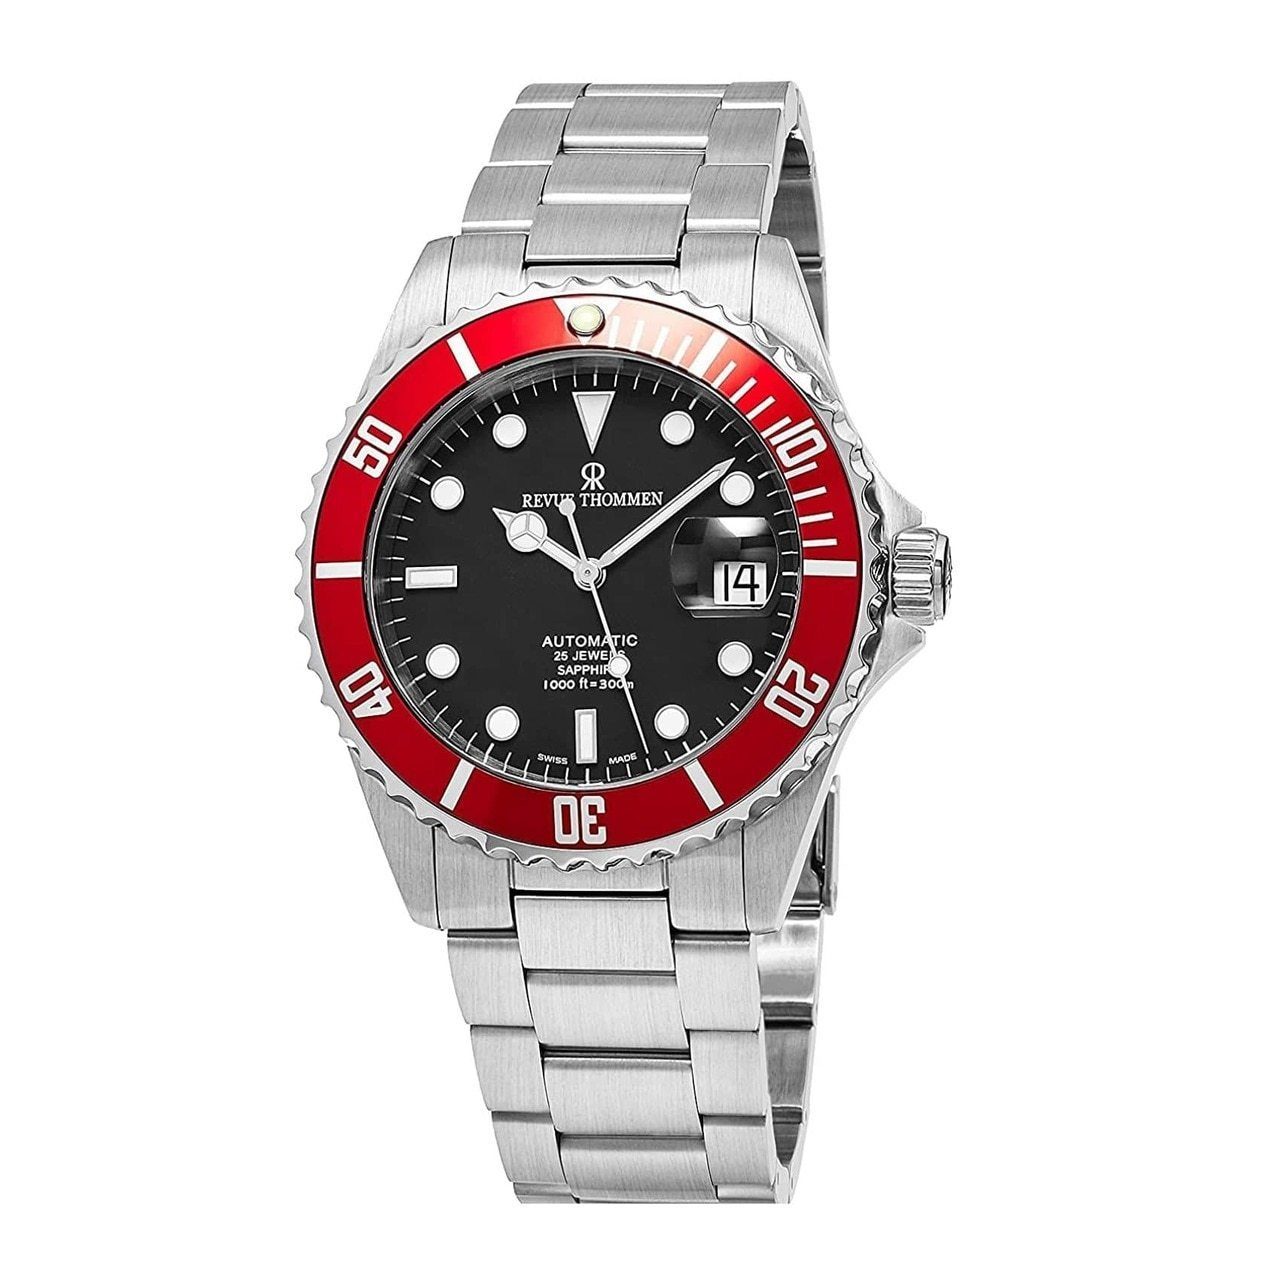 A Revue Thommen 17571.2136 Diver XL Stainless Steel Red Bezel Black Dial Men's Automatic Watch with red bezel.